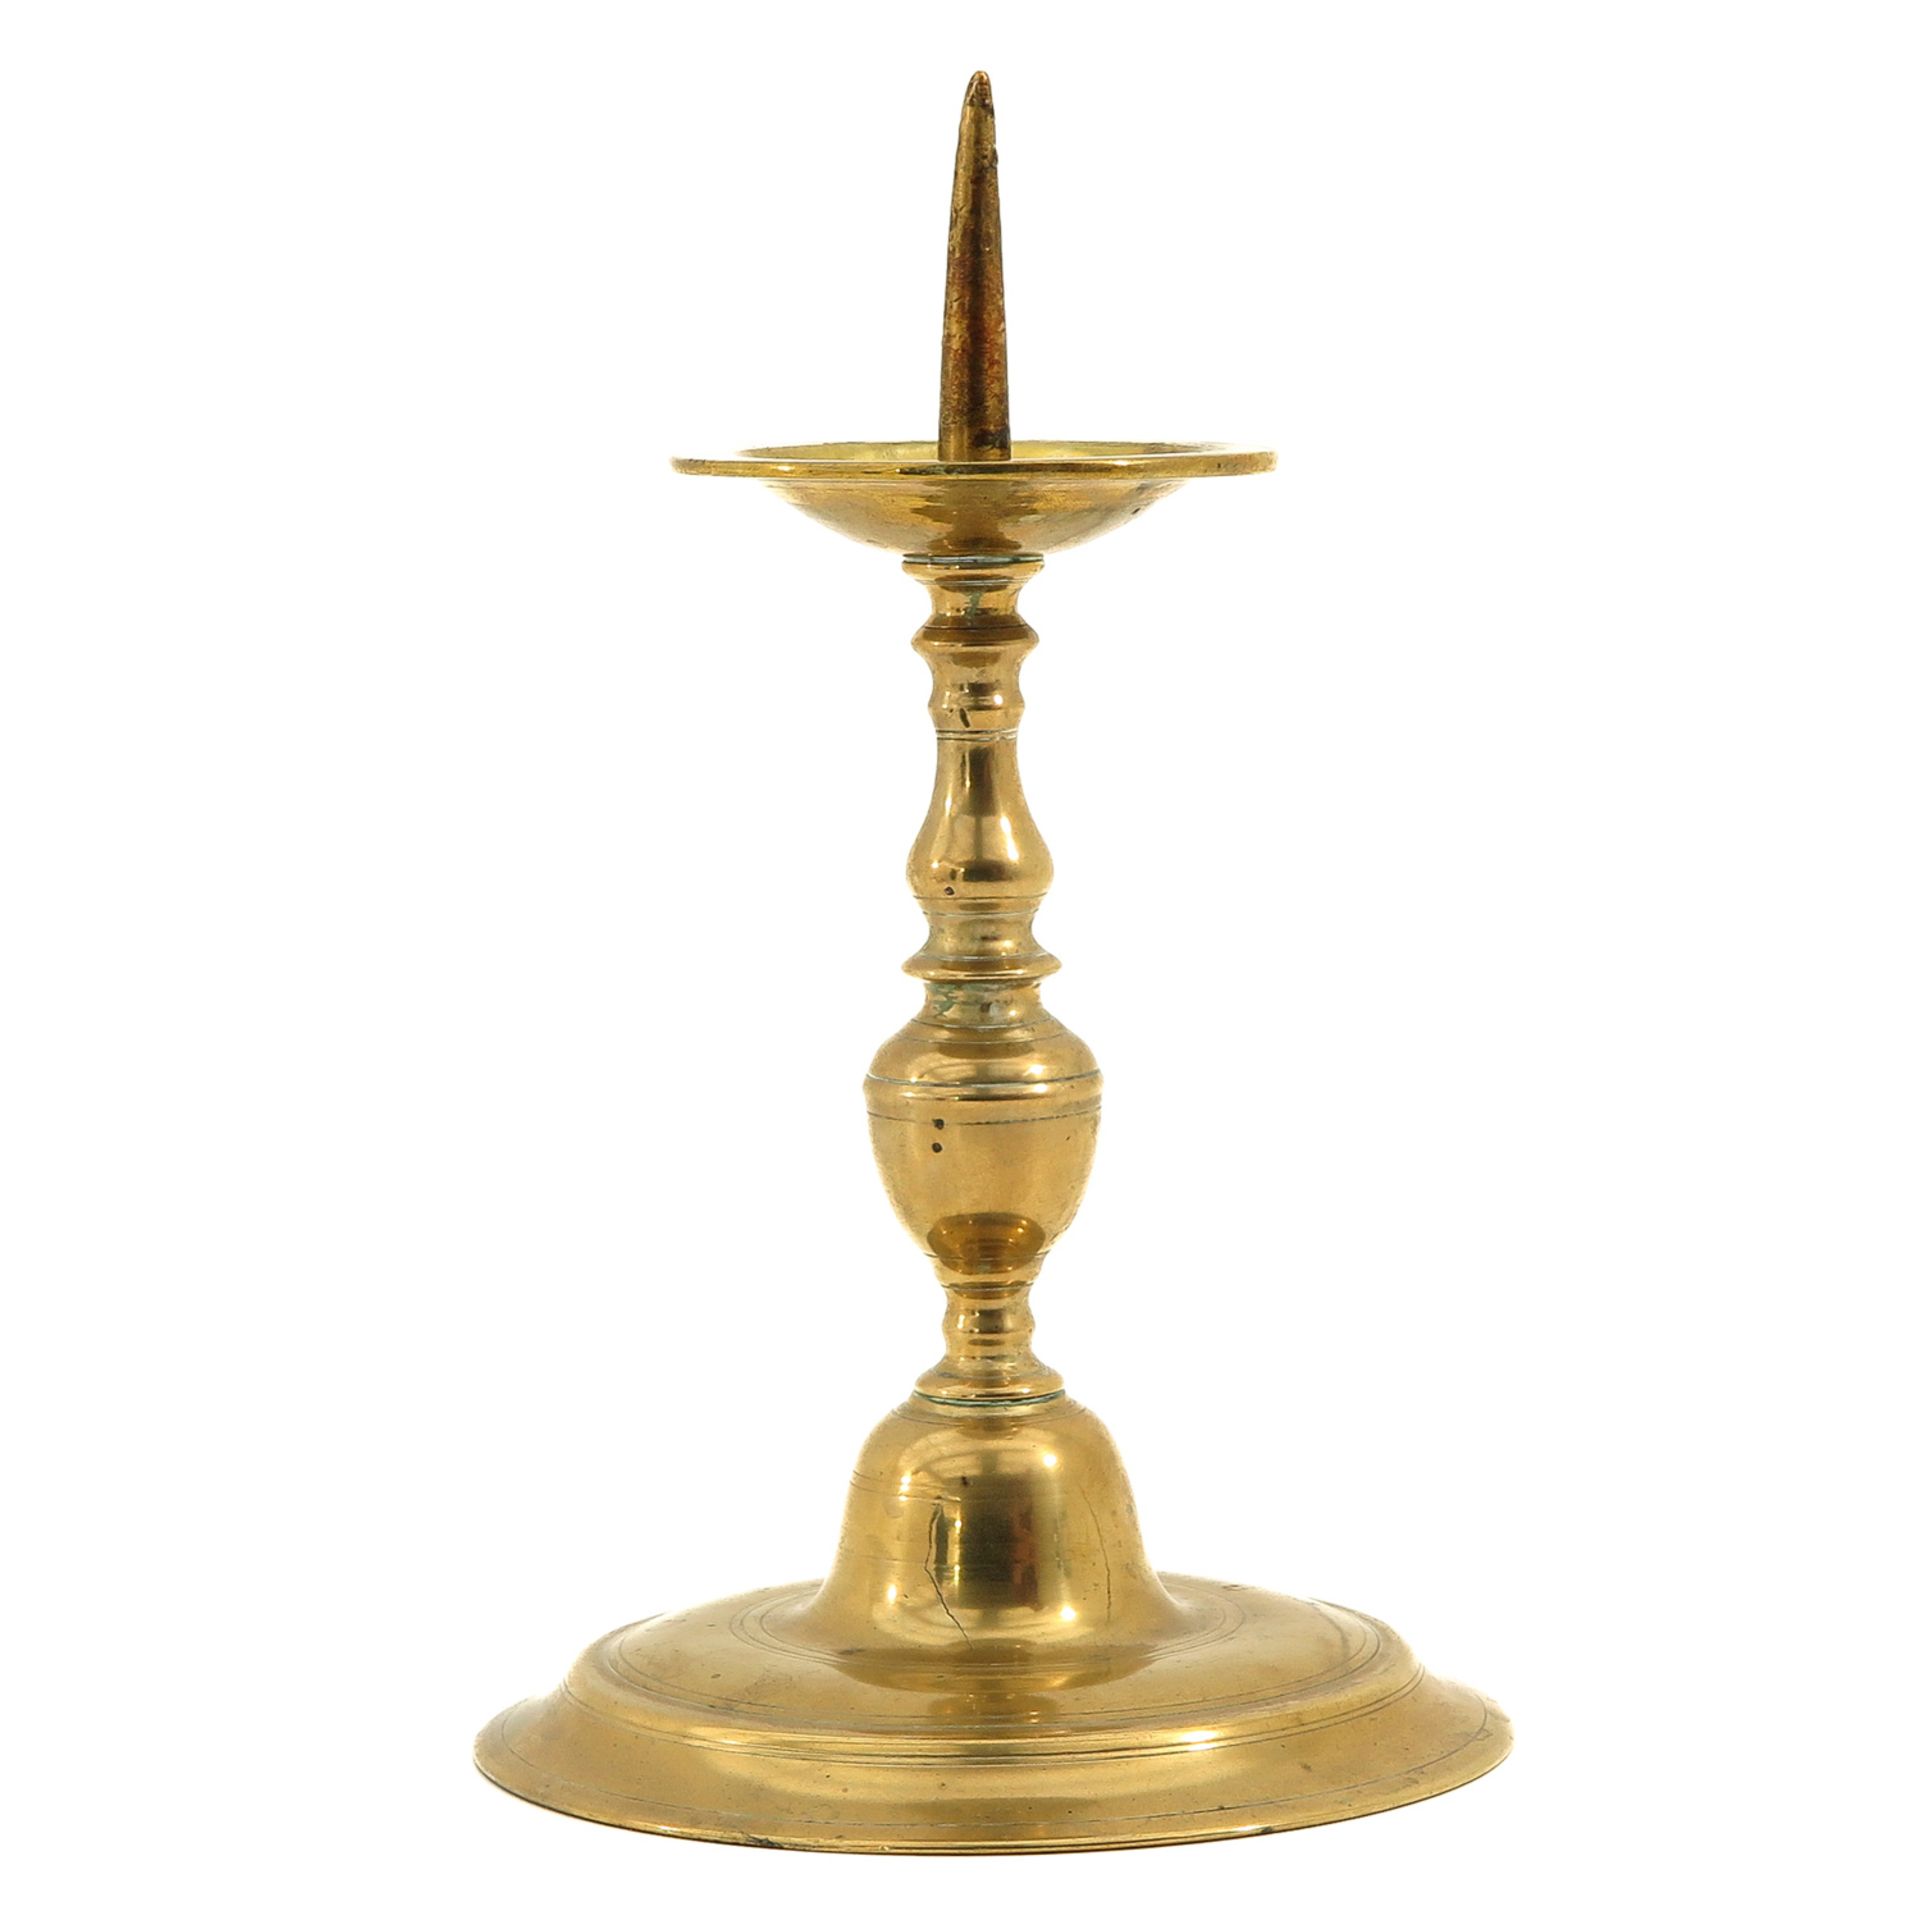 A 17th Century Pen Candlestick - Image 4 of 8